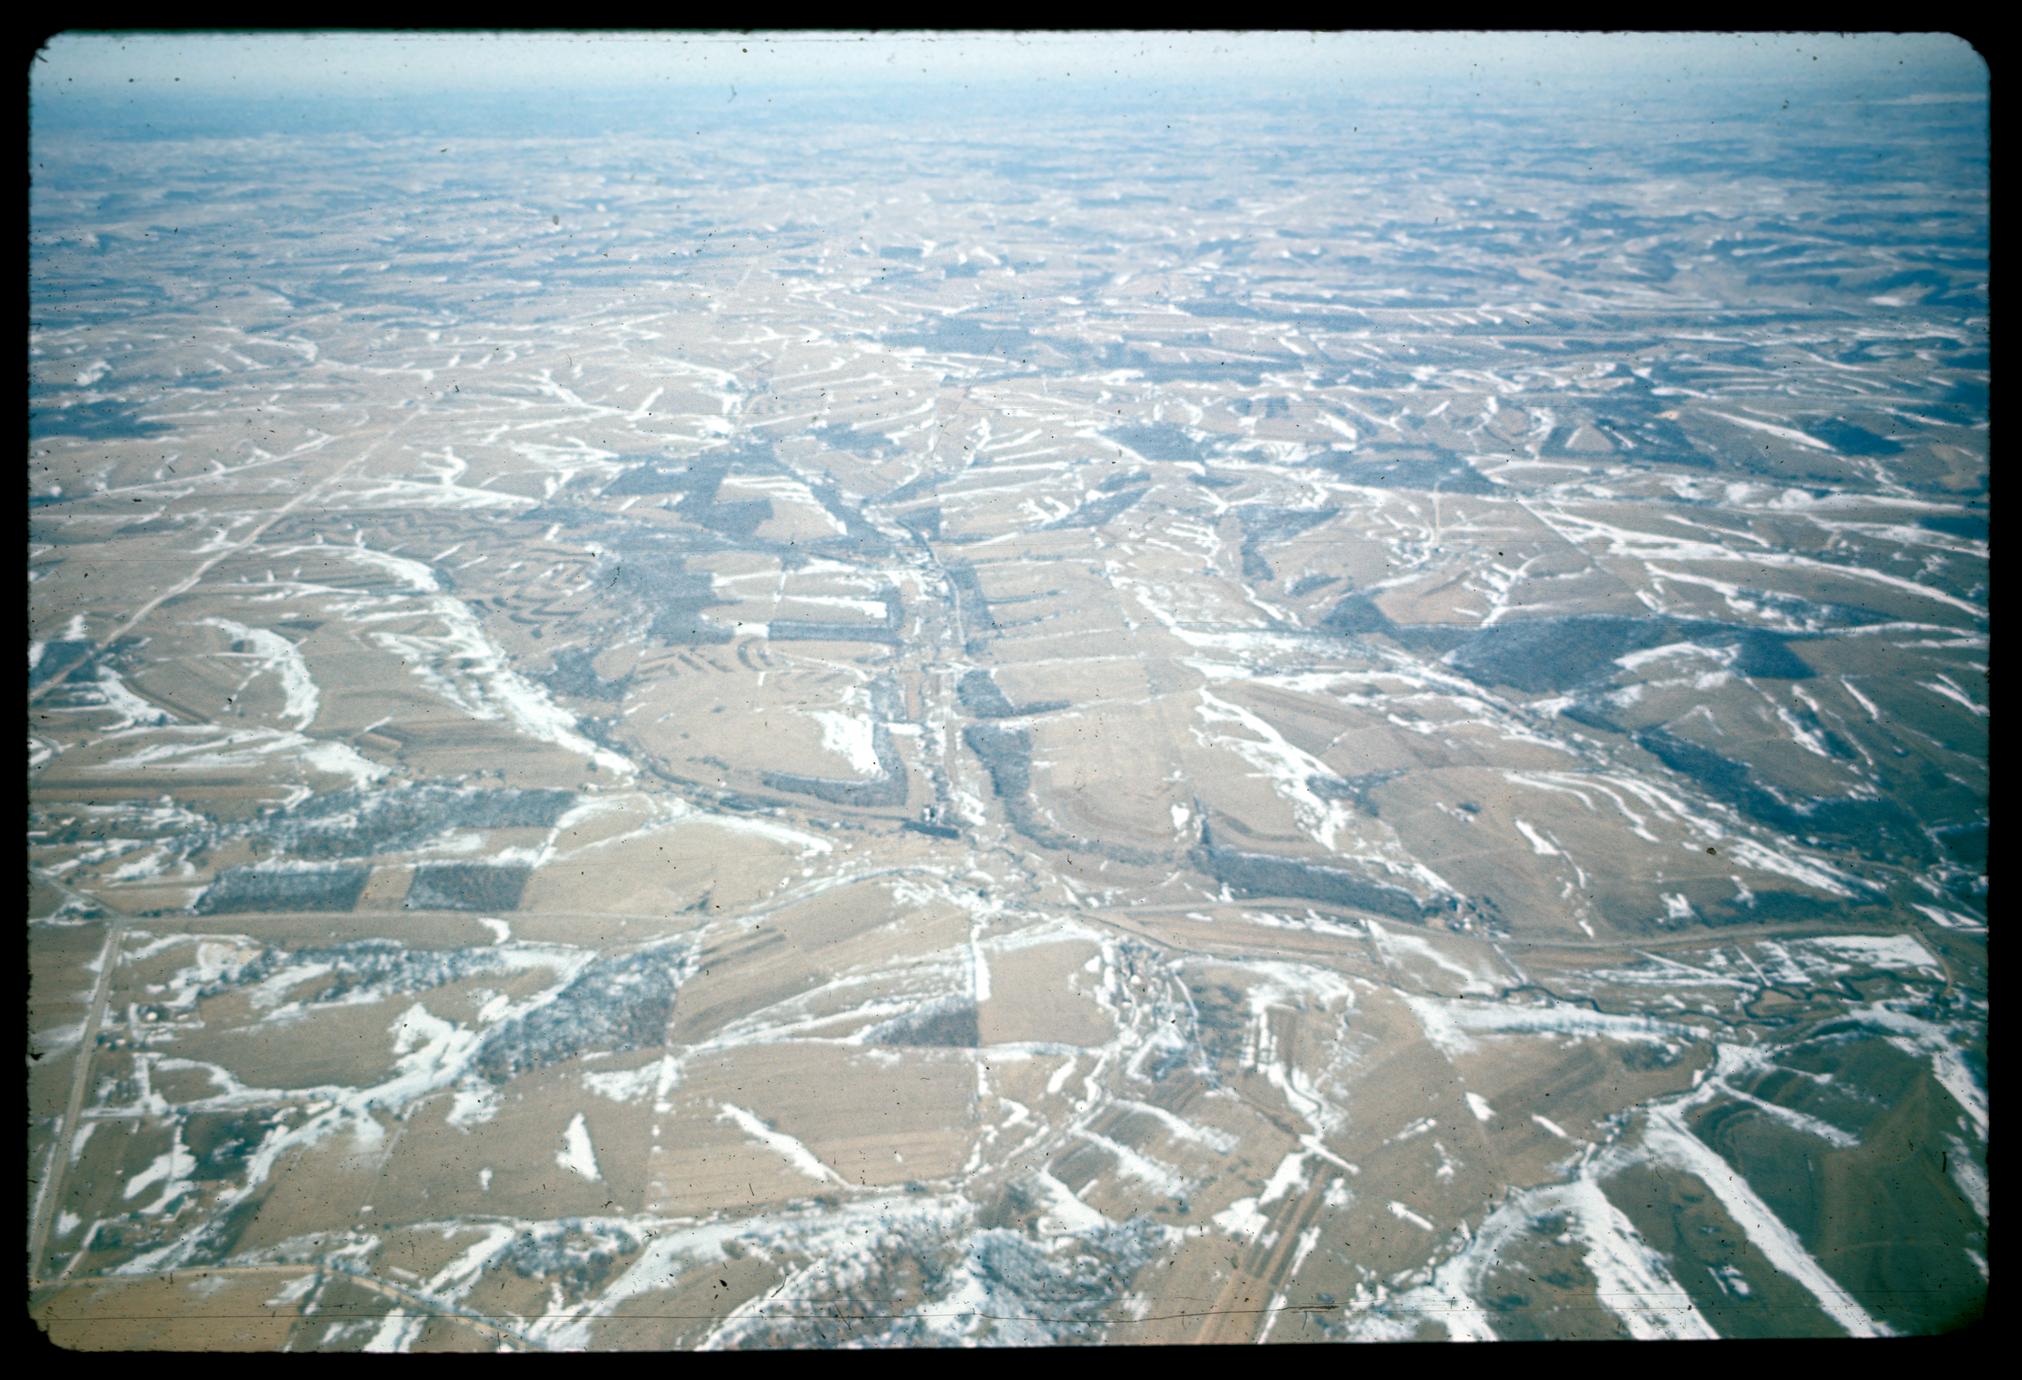 Aerial winter view of dendritic erosion in an agricultural landscape; probably in the driftless area of southwestern Wisconsin